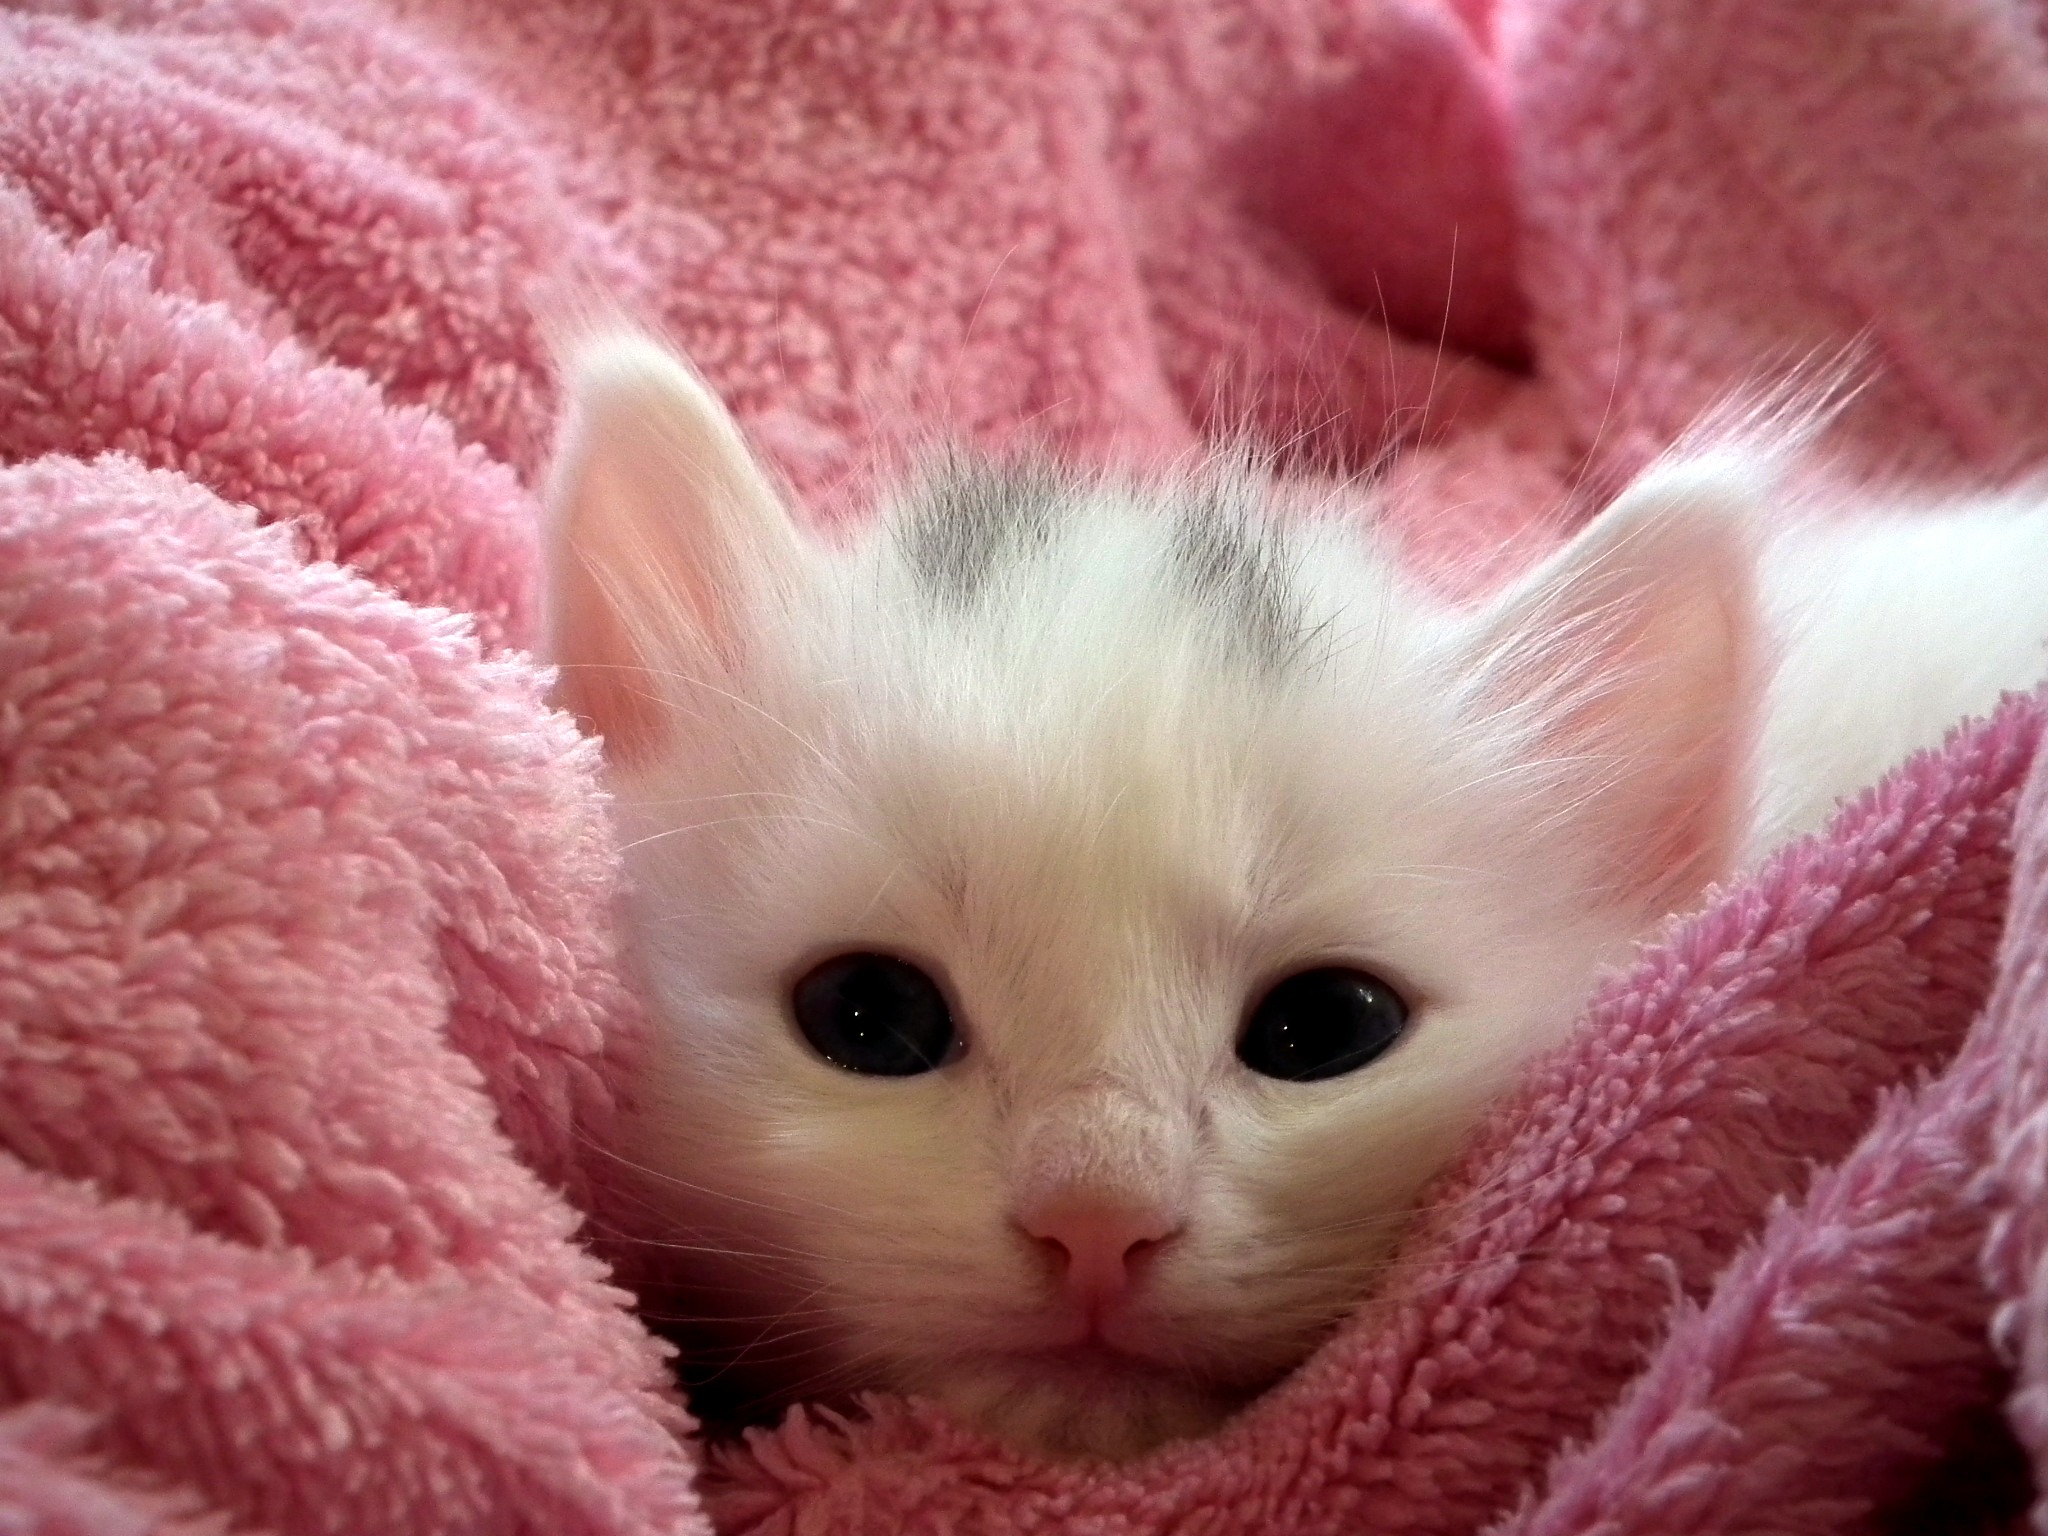 white kitten on pink towel, cat, fluffy cat, cute, animals, cats